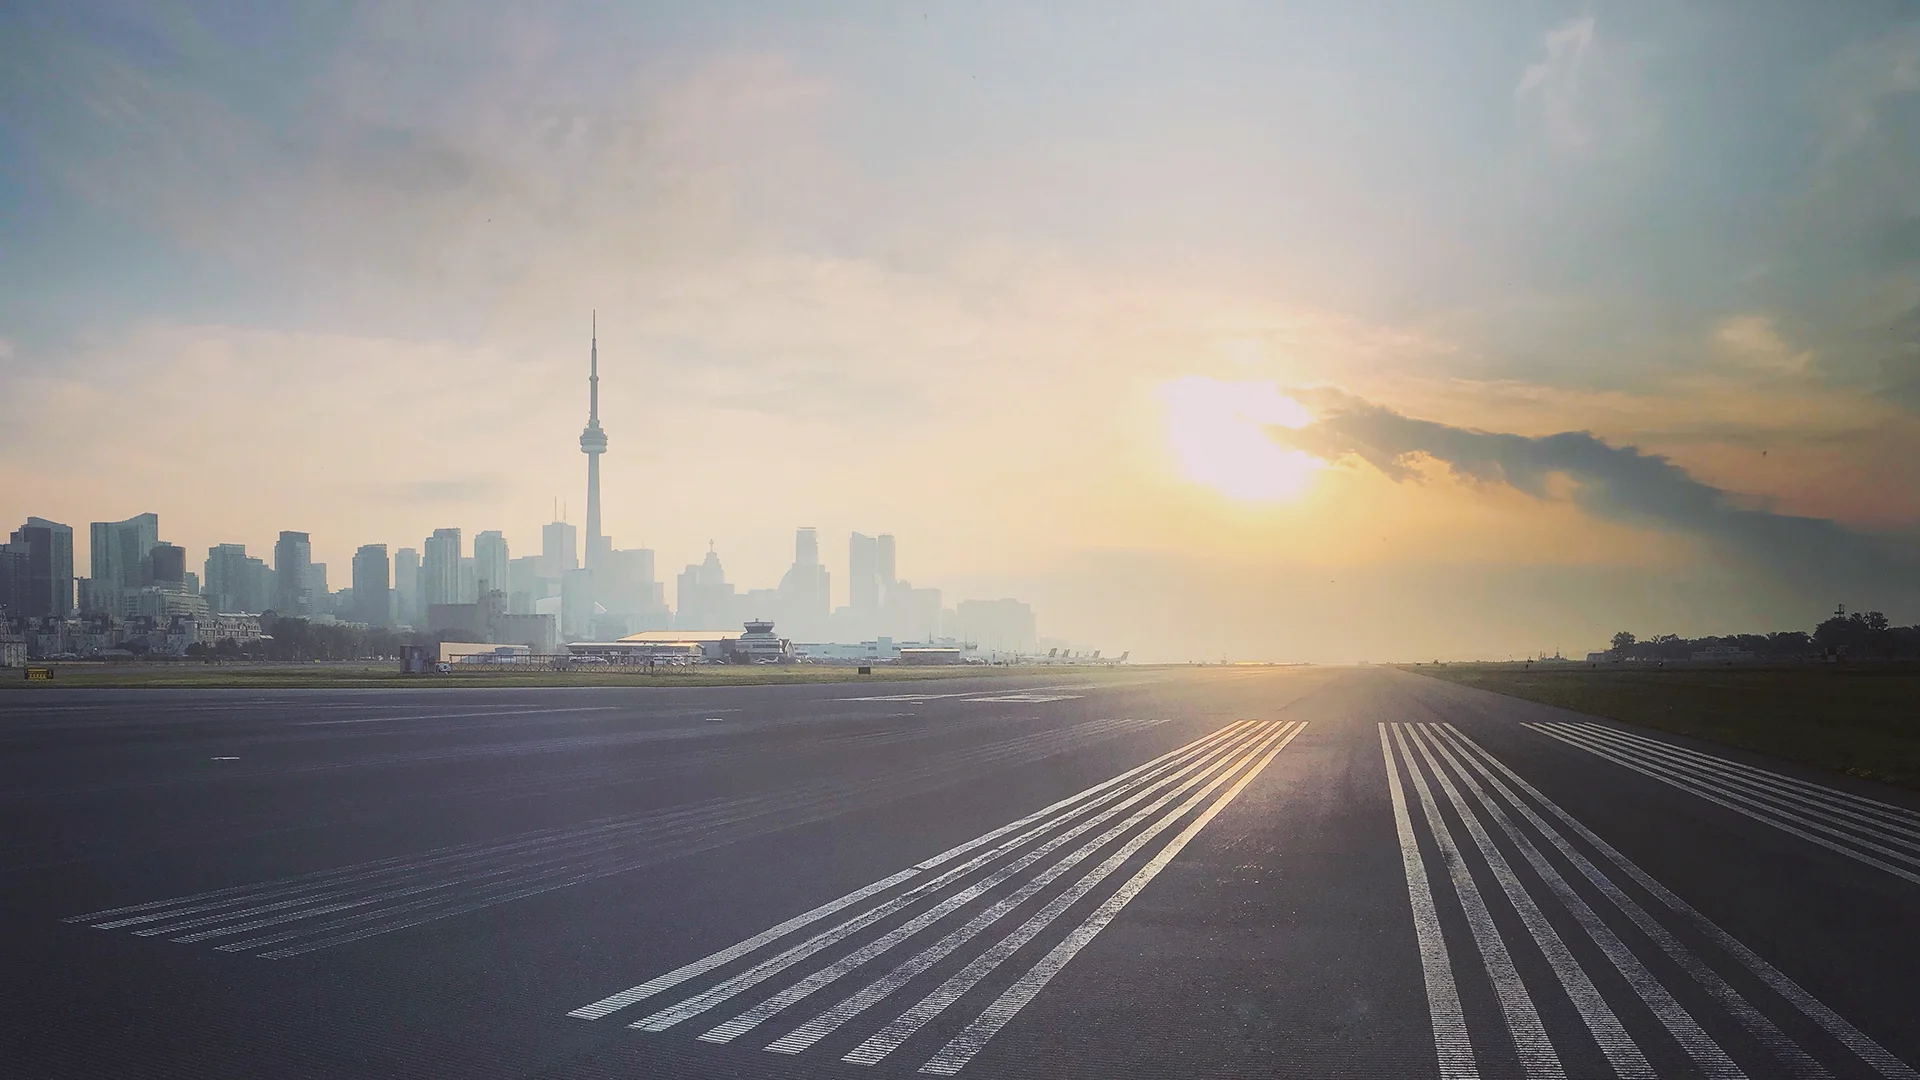 Airport runway with the city of Toronto in the background